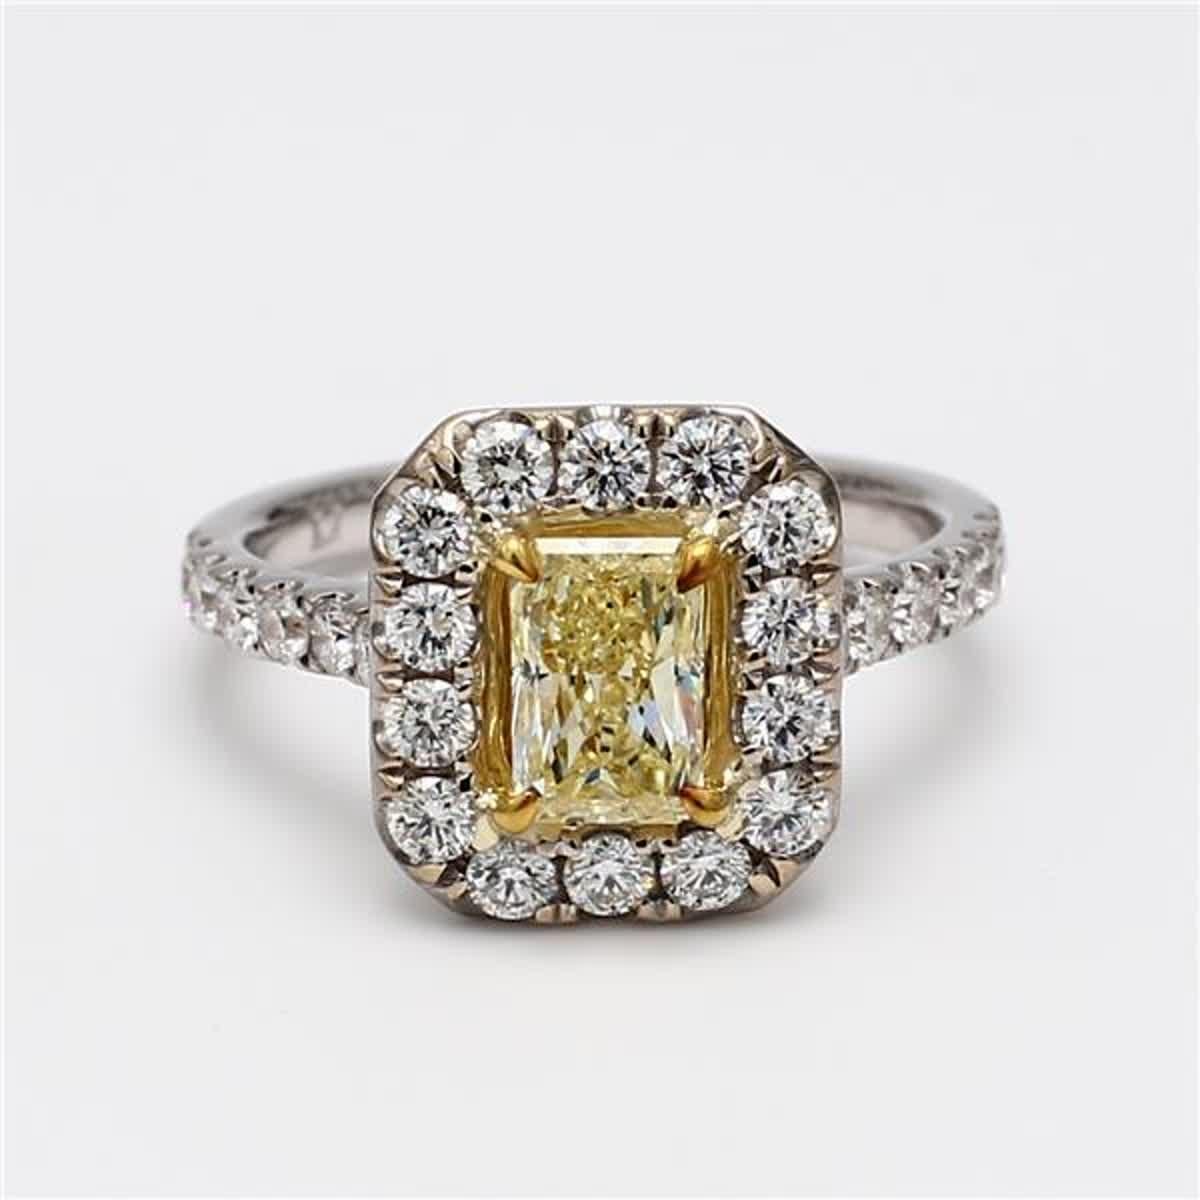 RareGemWorld's classic diamond ring. Mounted in a beautiful 18K Yellow and White Gold setting with a natural radiant cut yellow diamond. The yellow diamond is surrounded by small round natural white diamond melee. This ring is guaranteed to impress